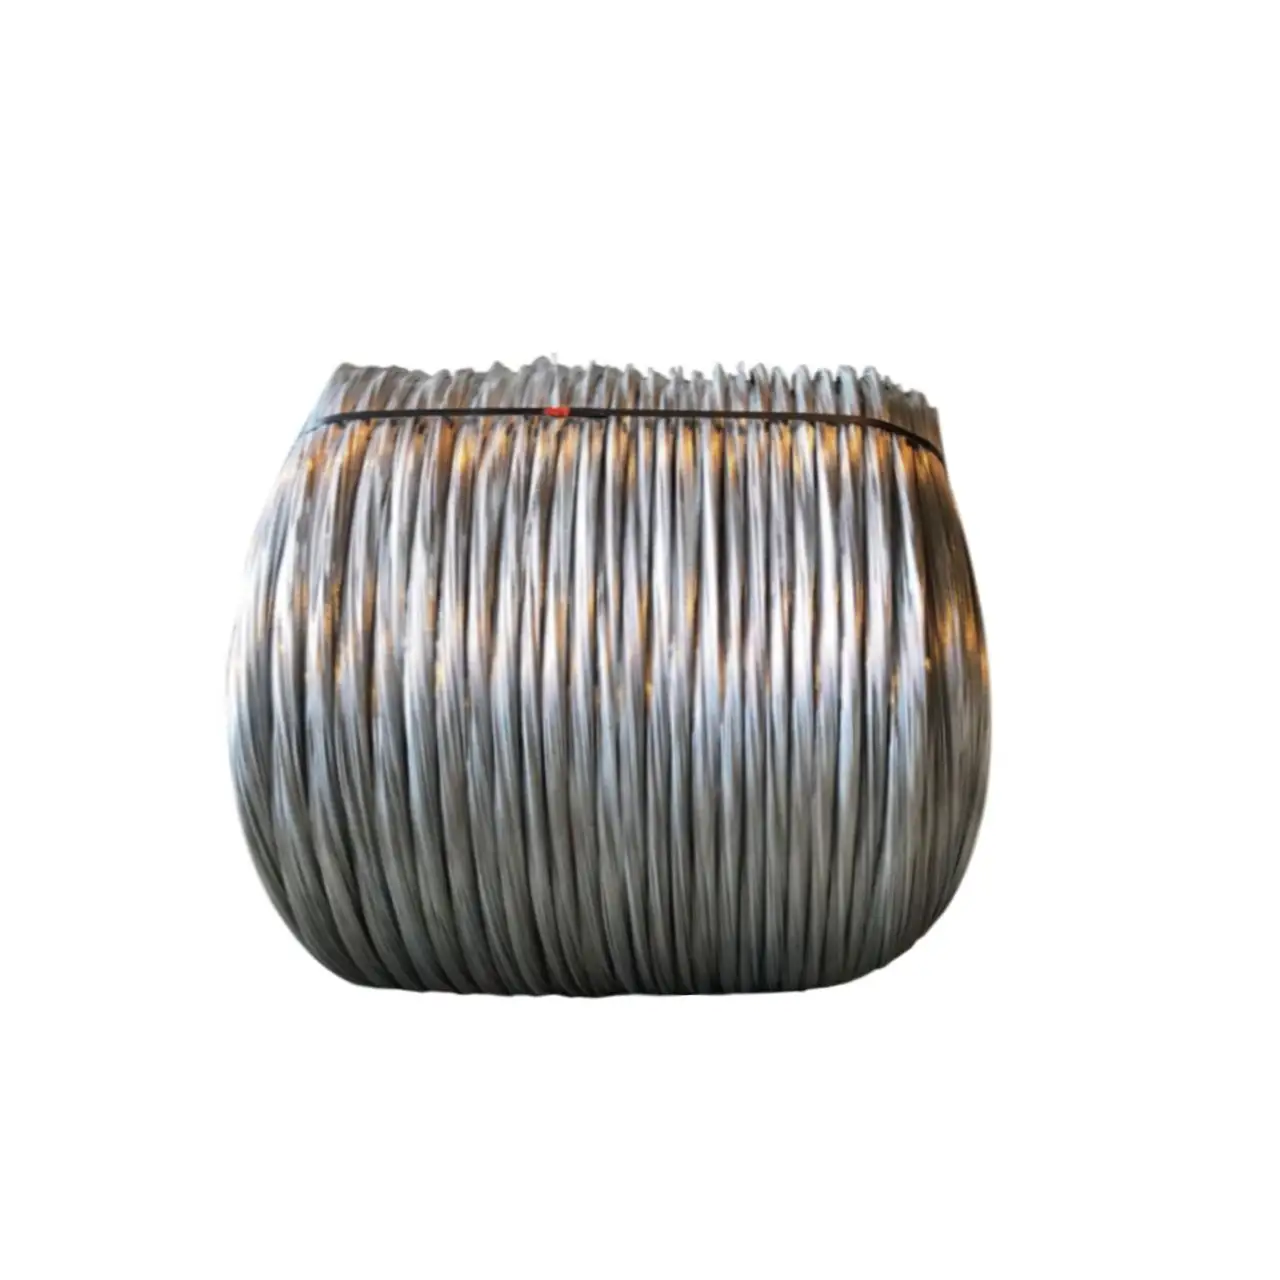 Top quality Italian galvanized steel wire for armouring